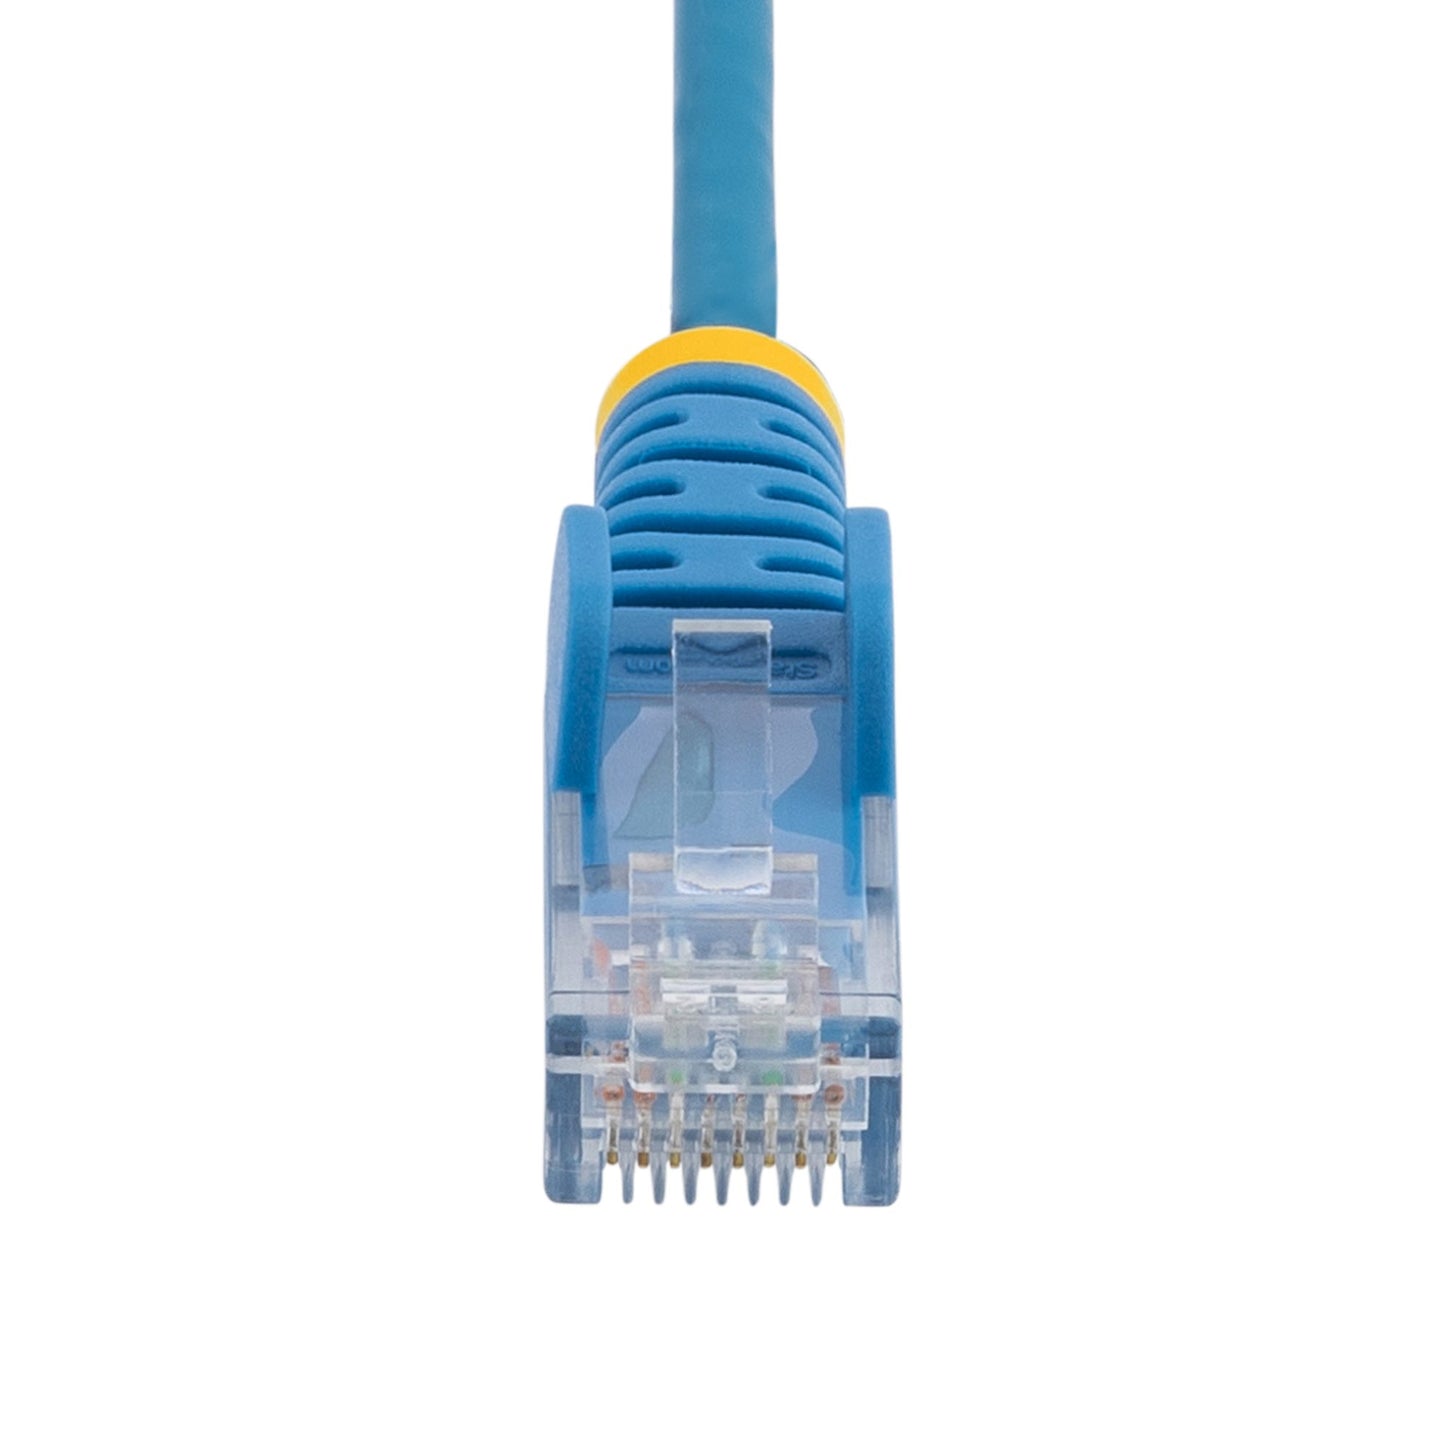 STARTECH CONSIG CABLE 1.8M RED ETHERNET CAT6 CABL SIN ENGANCHES SNAGLESS AZUL